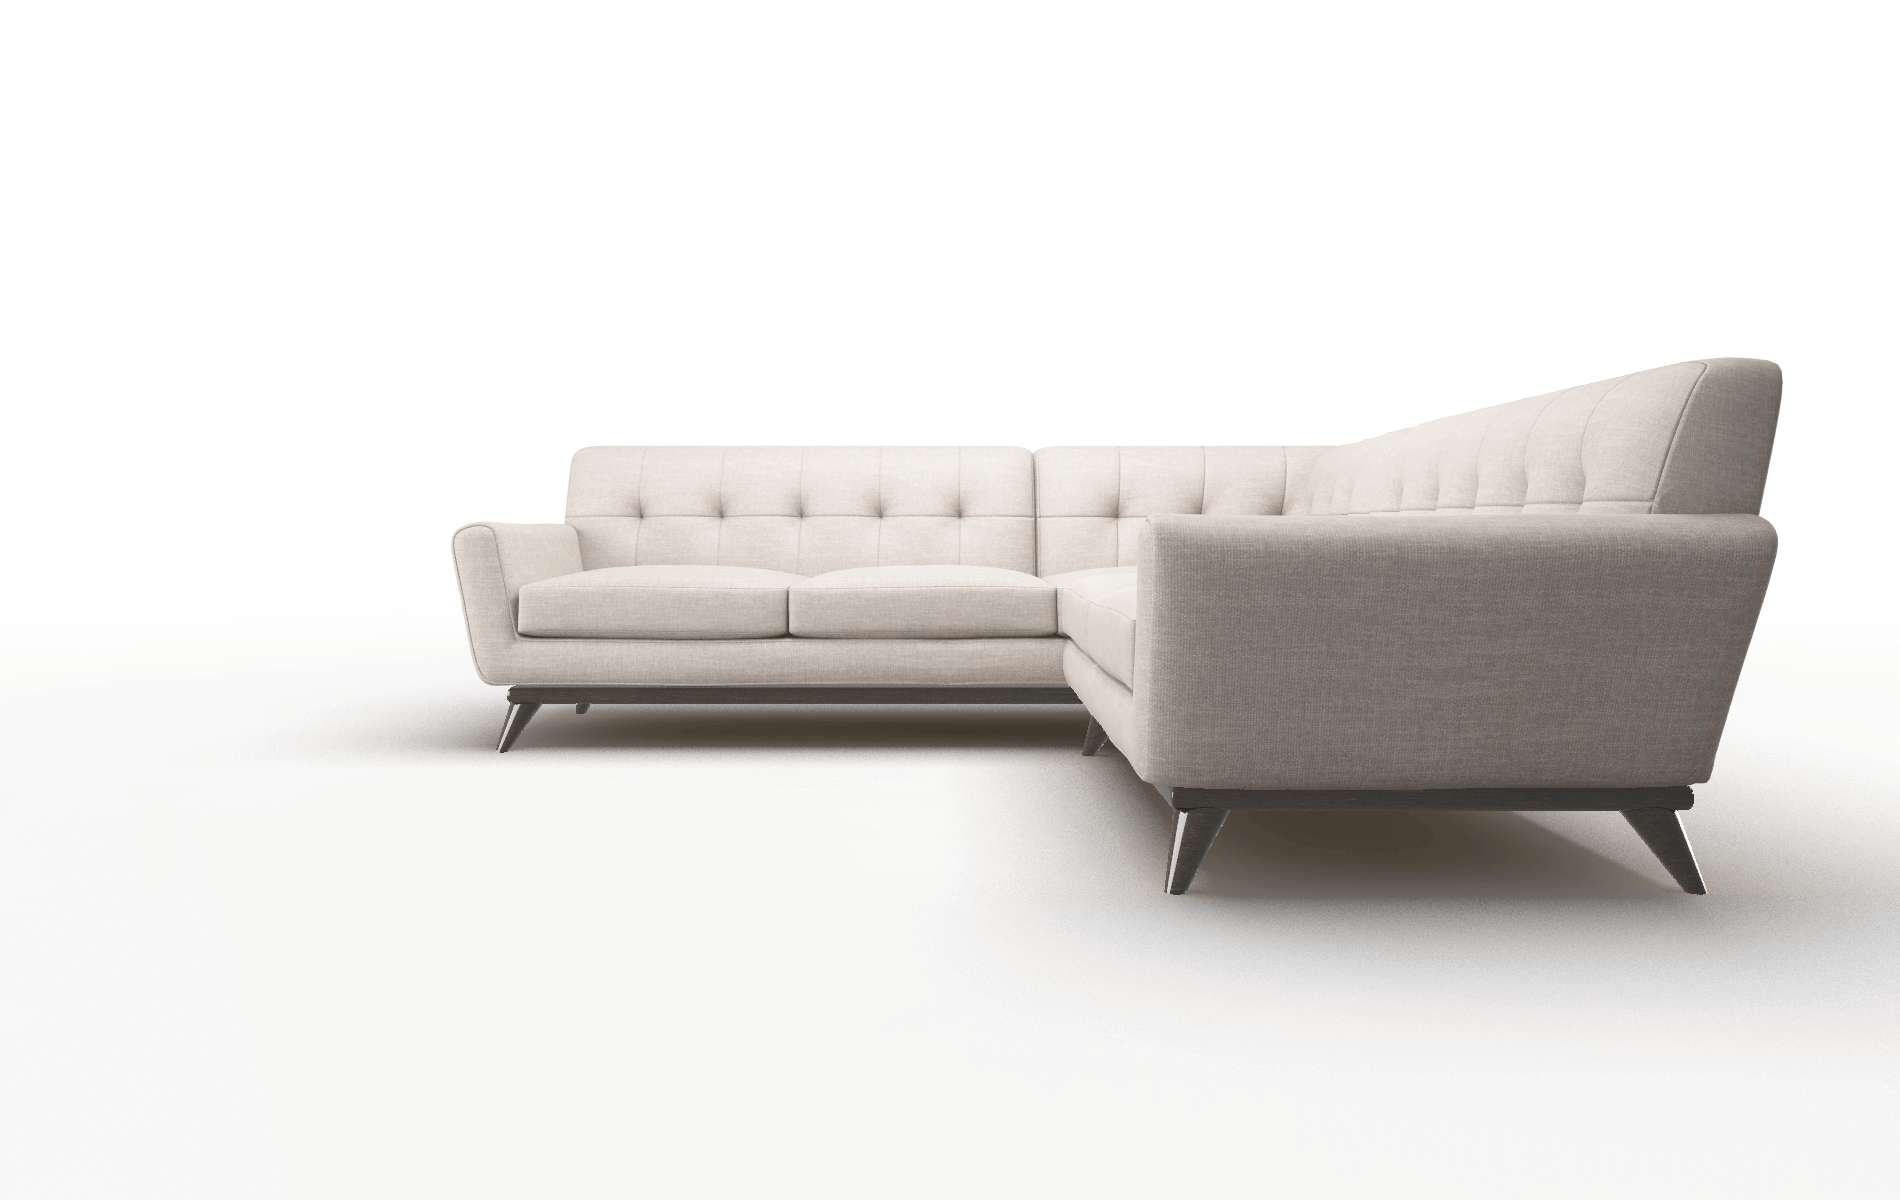 Brussels Clyde Dolphin Sectional espresso legs